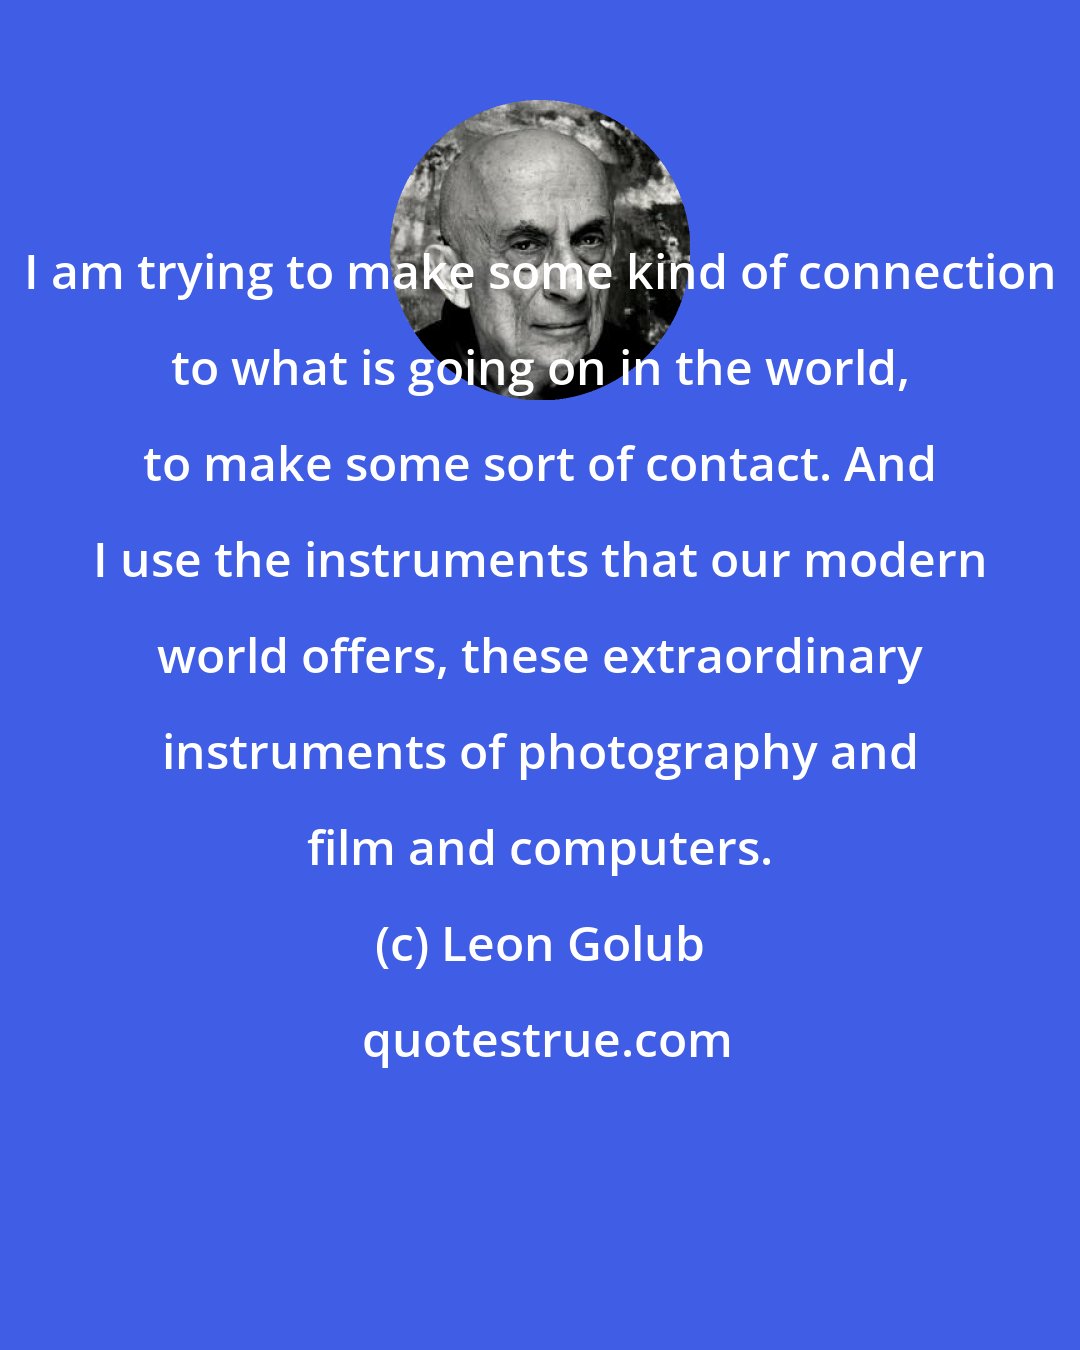 Leon Golub: I am trying to make some kind of connection to what is going on in the world, to make some sort of contact. And I use the instruments that our modern world offers, these extraordinary instruments of photography and film and computers.